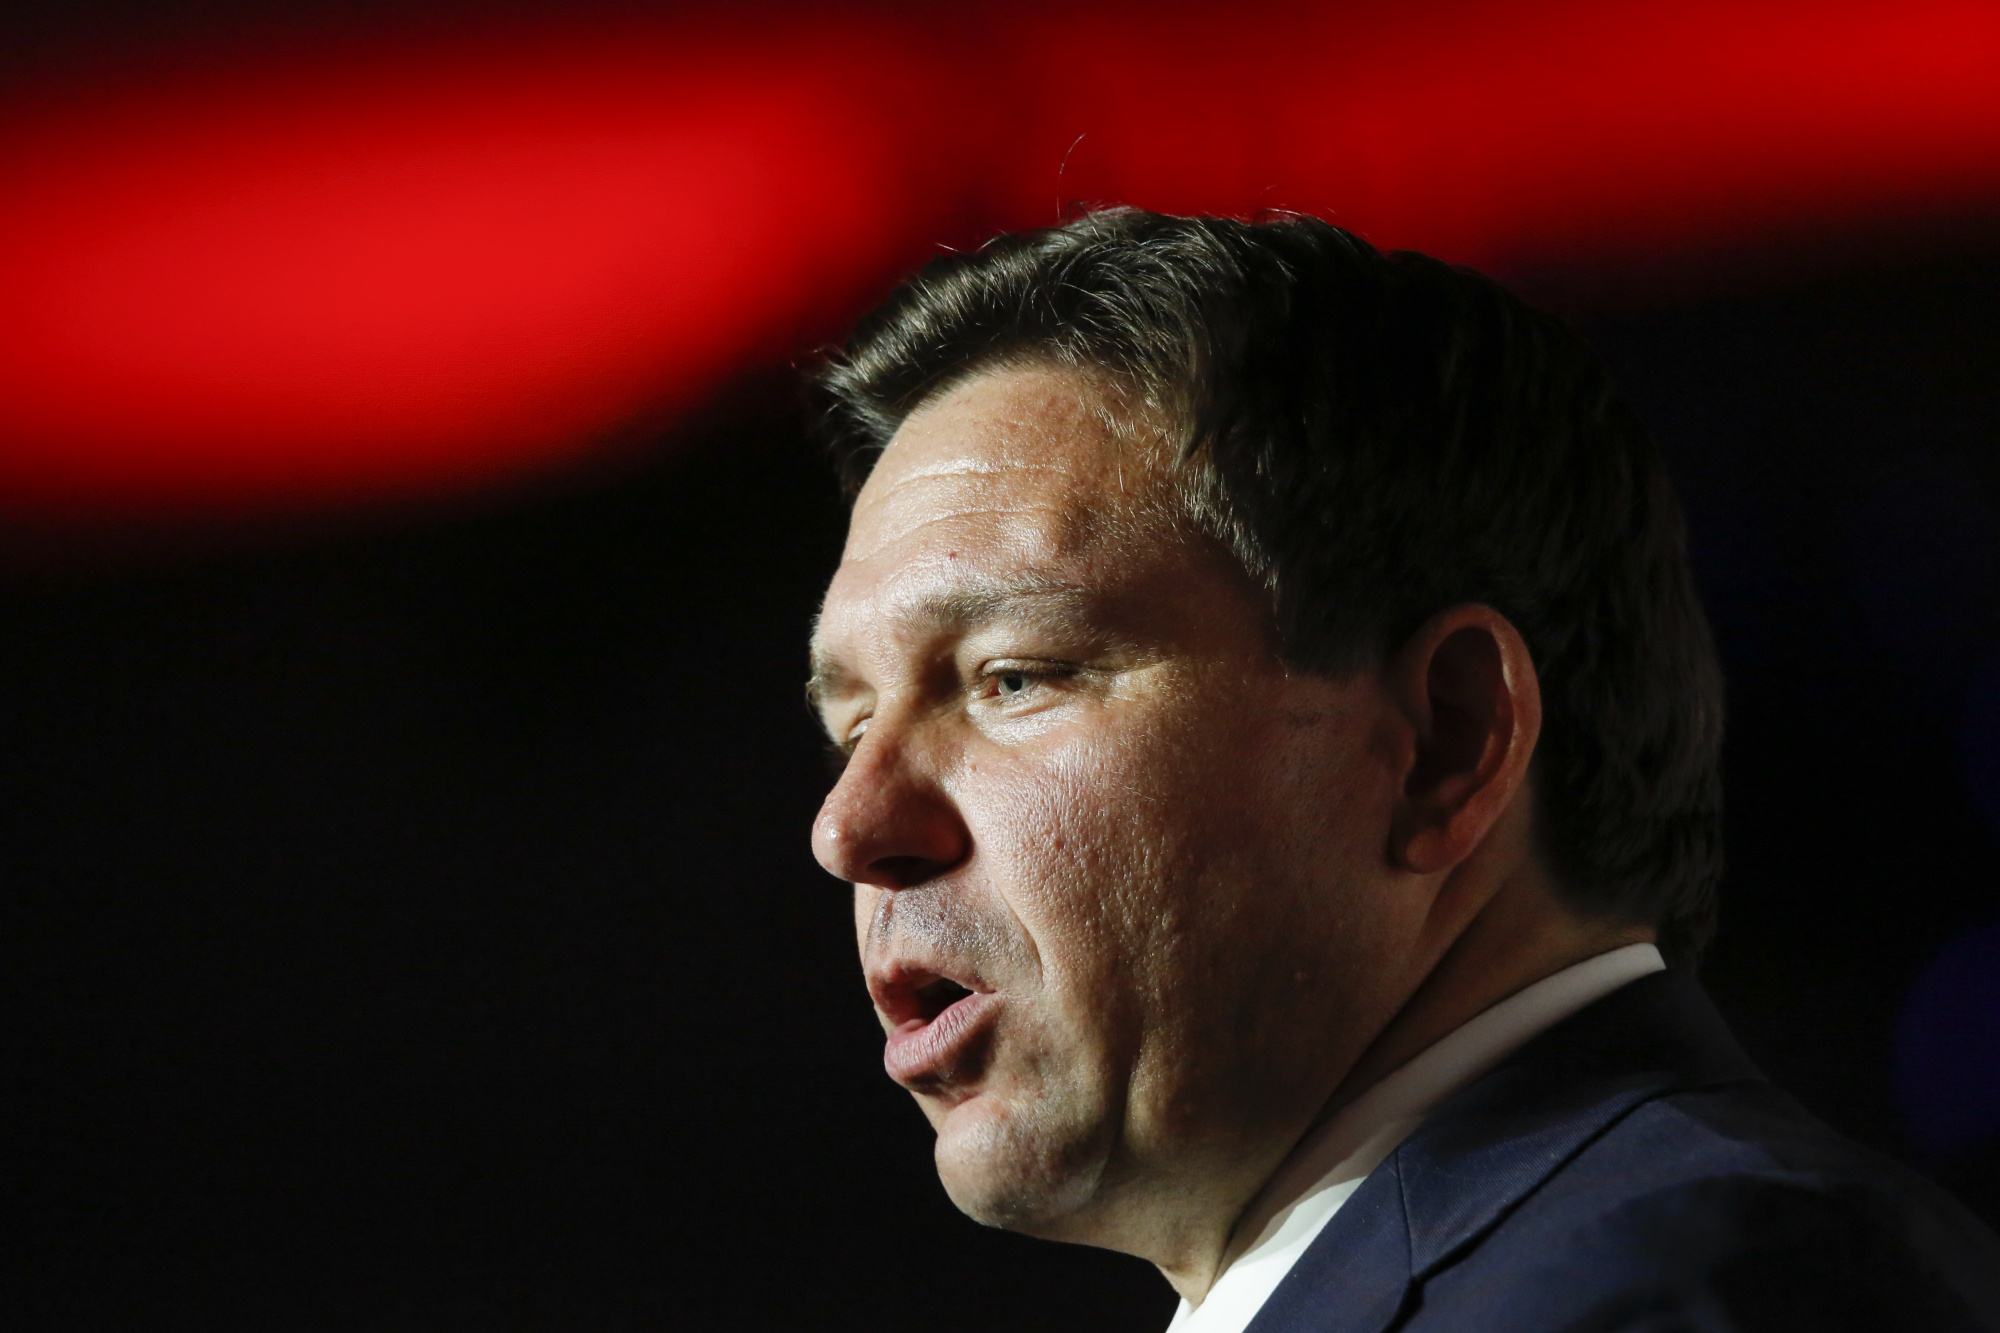 Florida Governor Ron DeSantis, a potential 2024 presidential candidate, wooed voters last month with a pledge to “protect” them from the ESG movement.